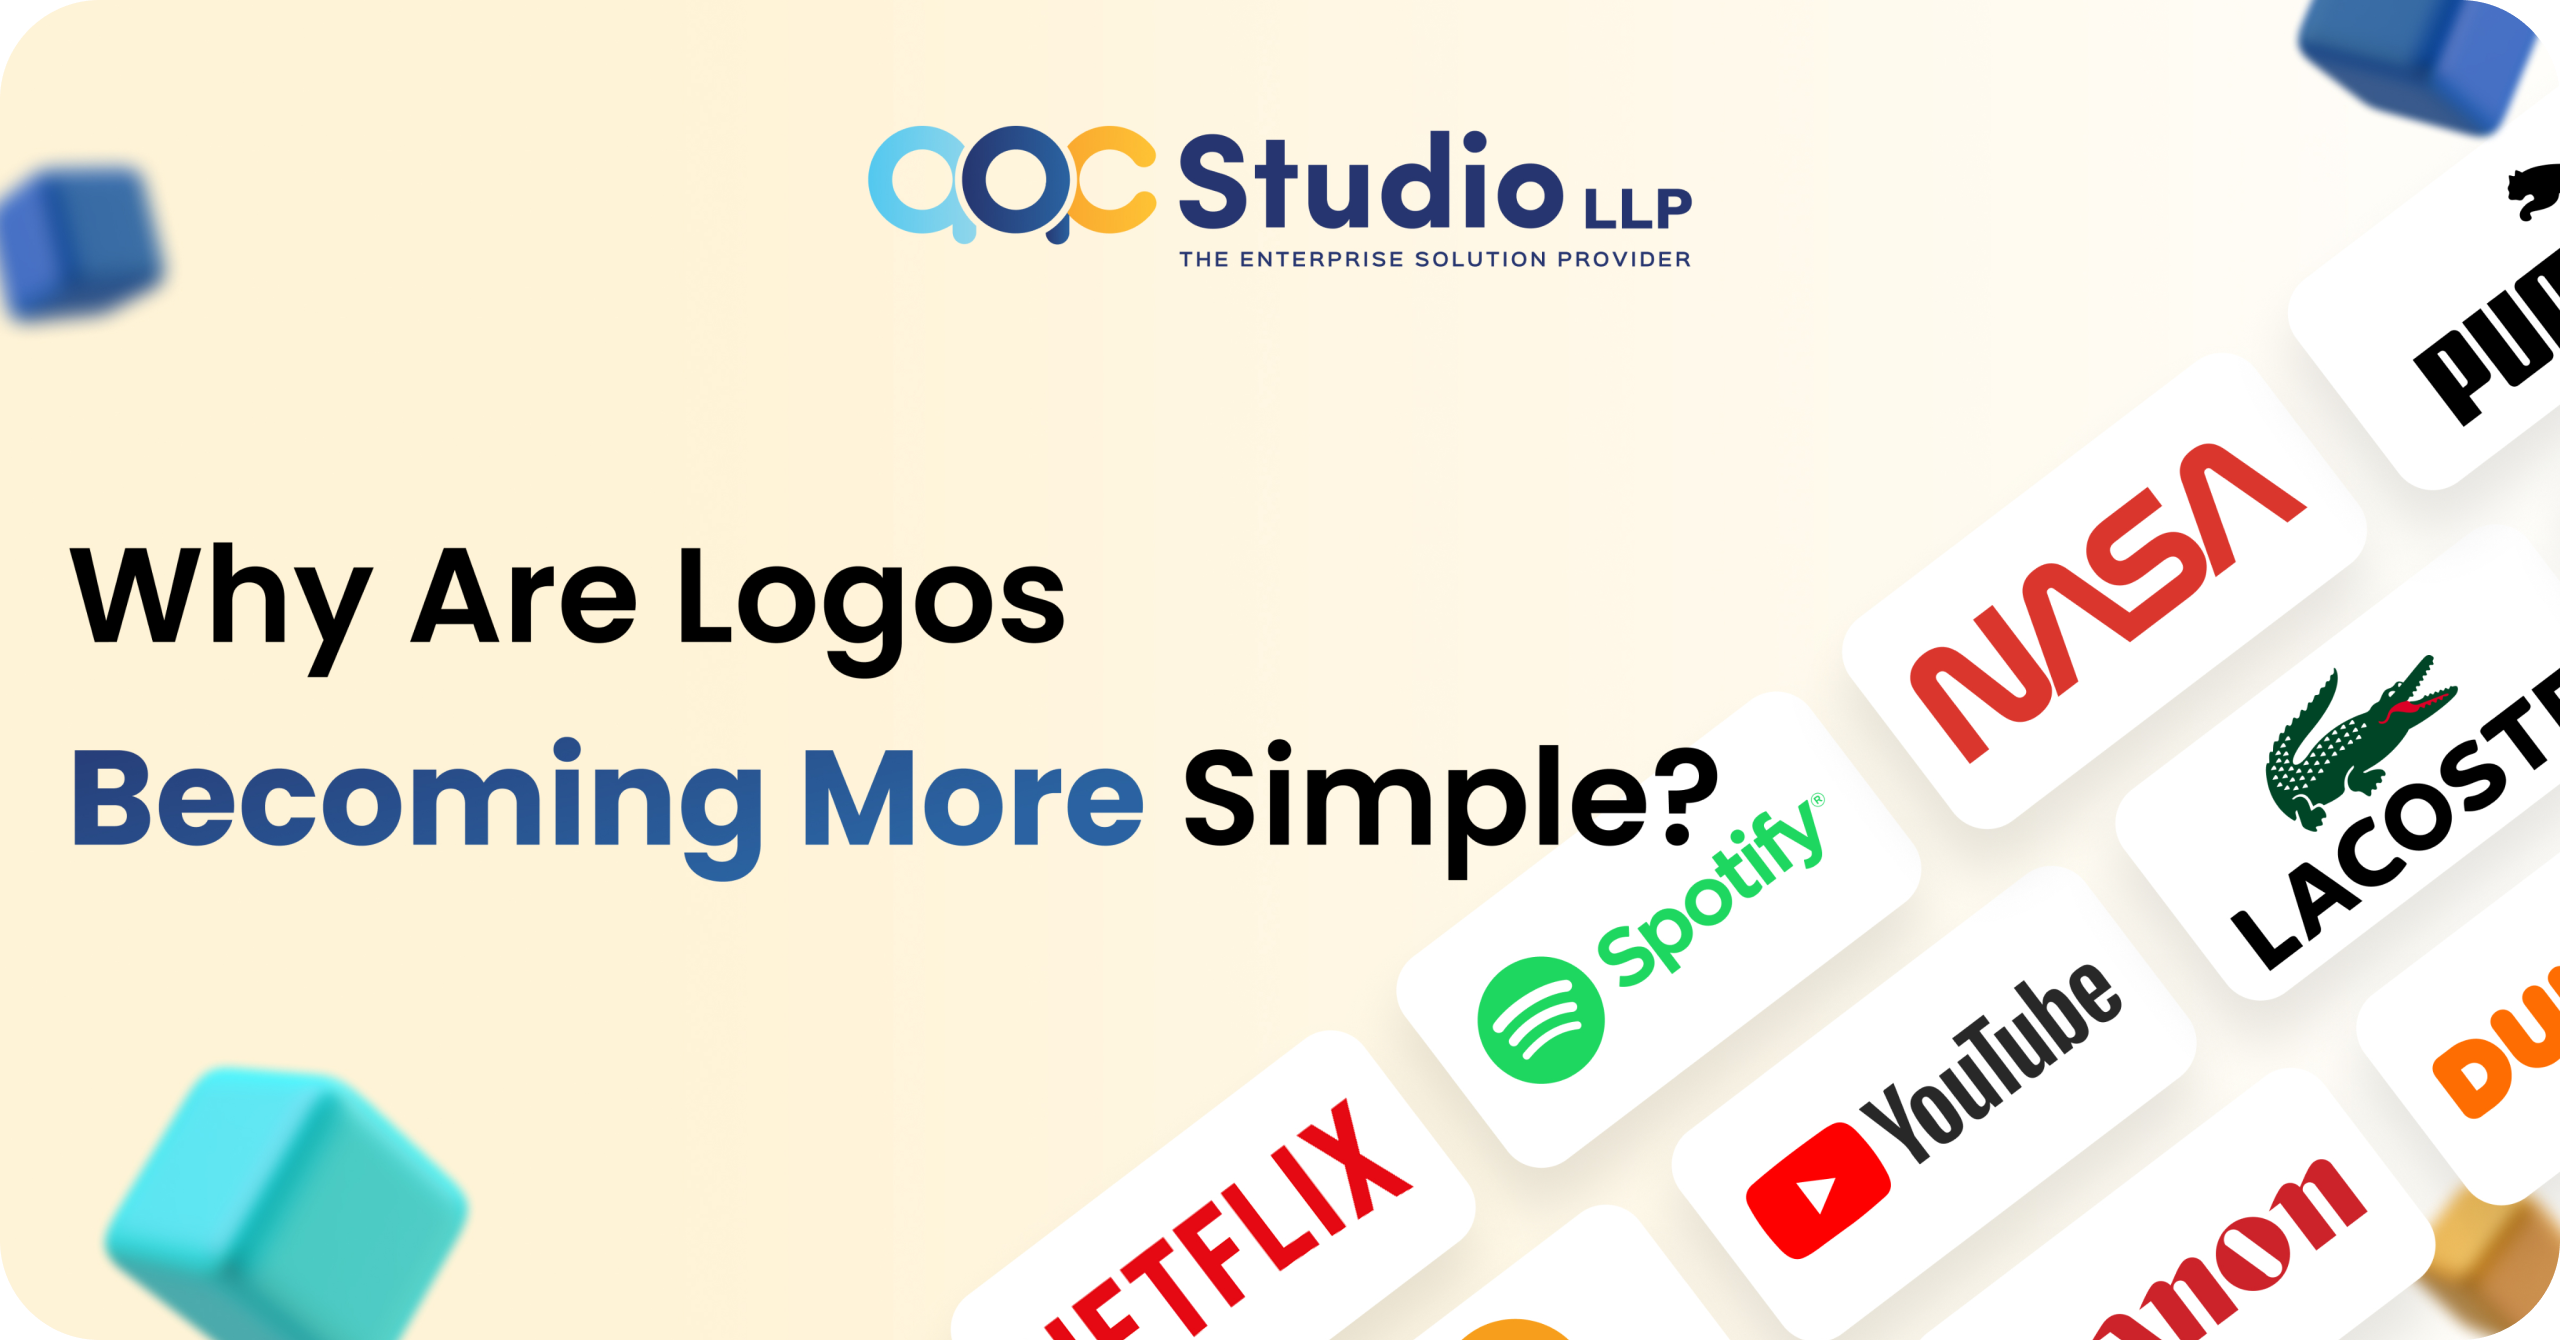 Why Are Logos Becoming More and More Simple?